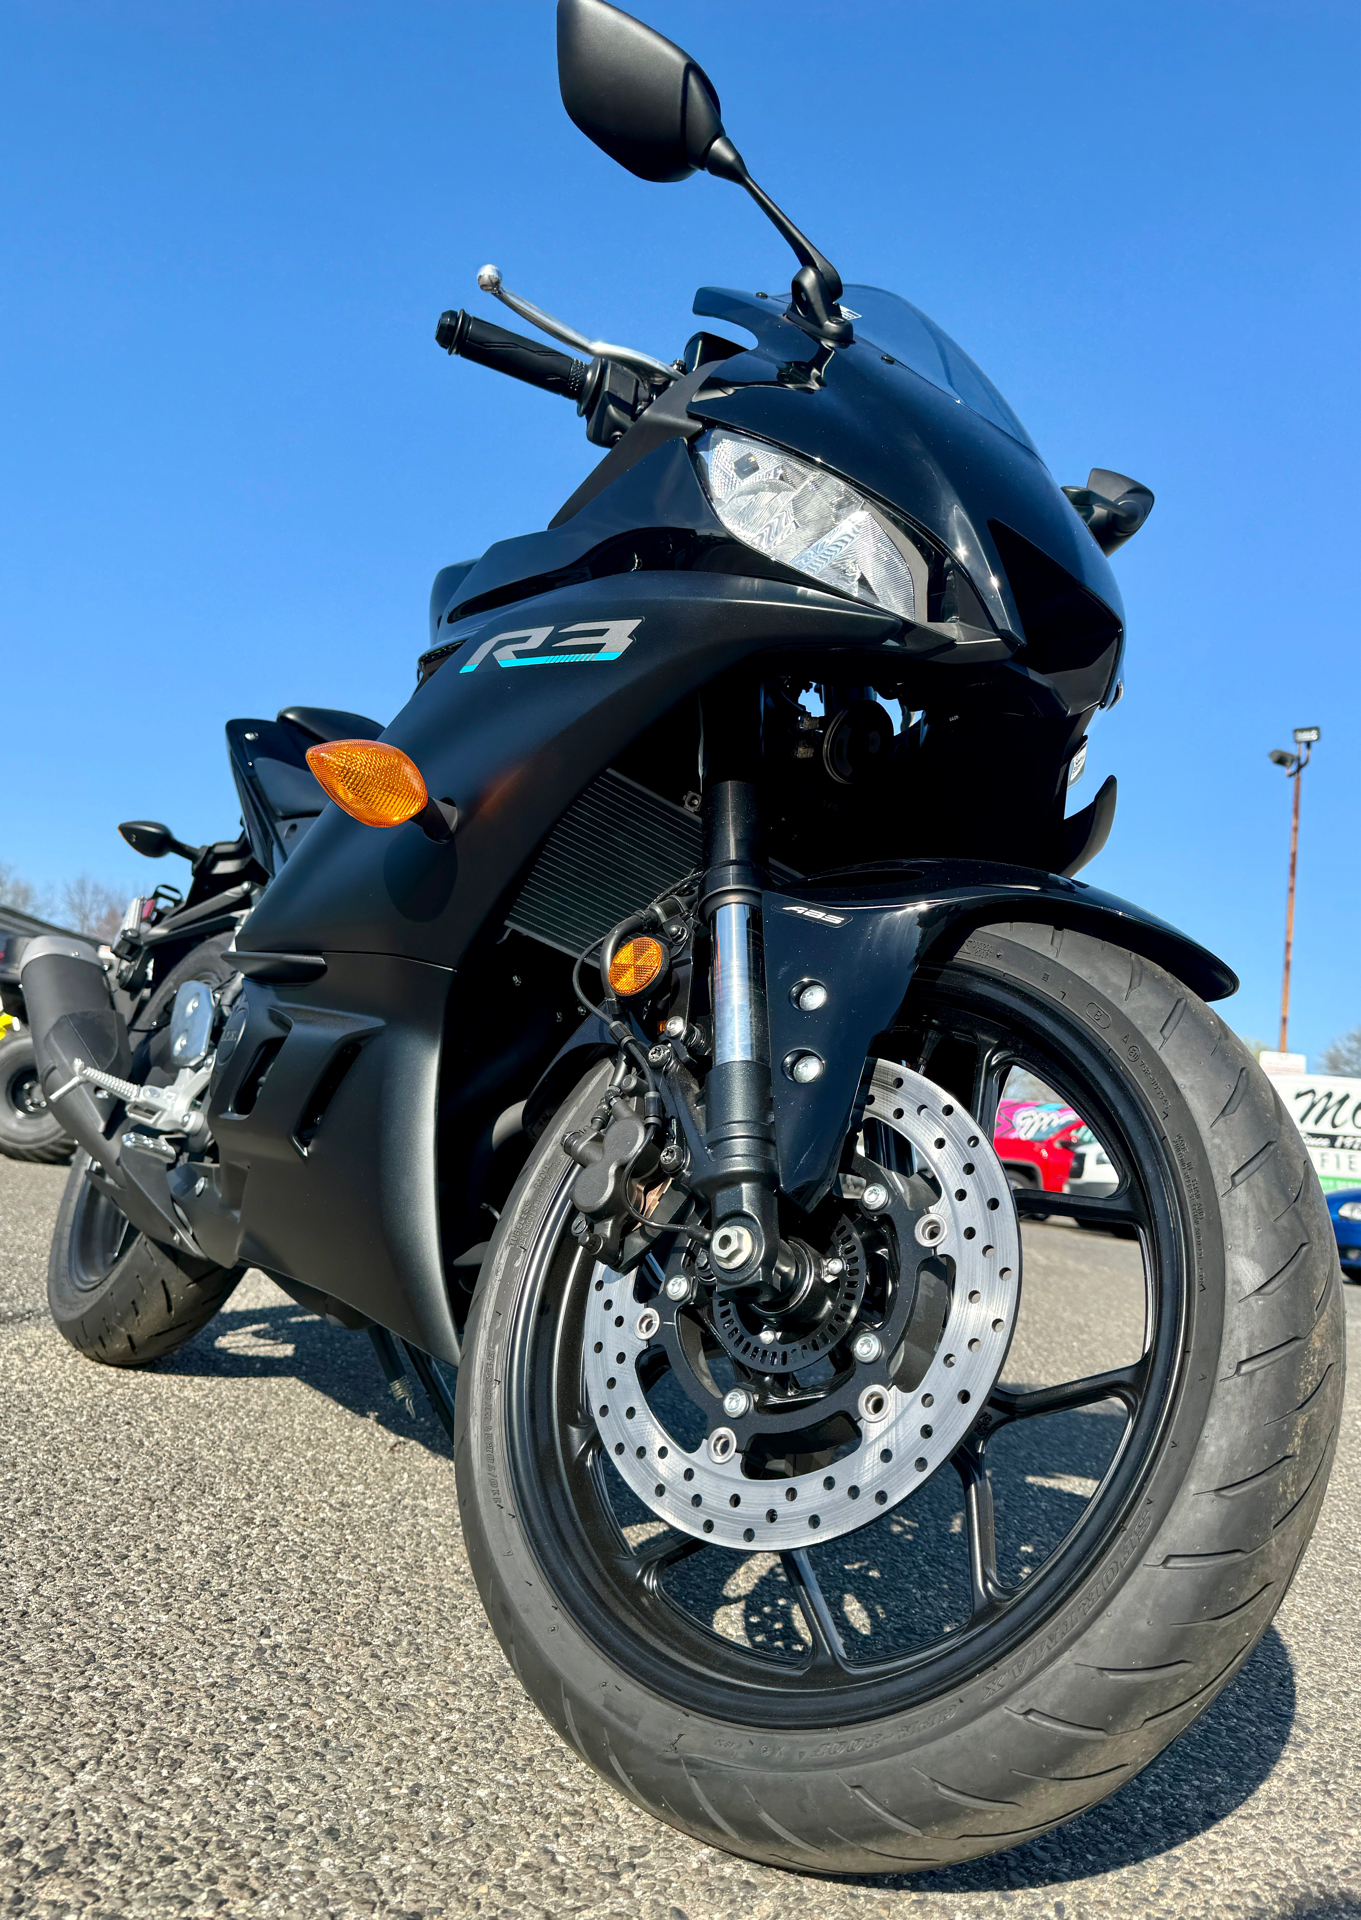 2023 Yamaha YZF-R3 ABS in Enfield, Connecticut - Photo 9